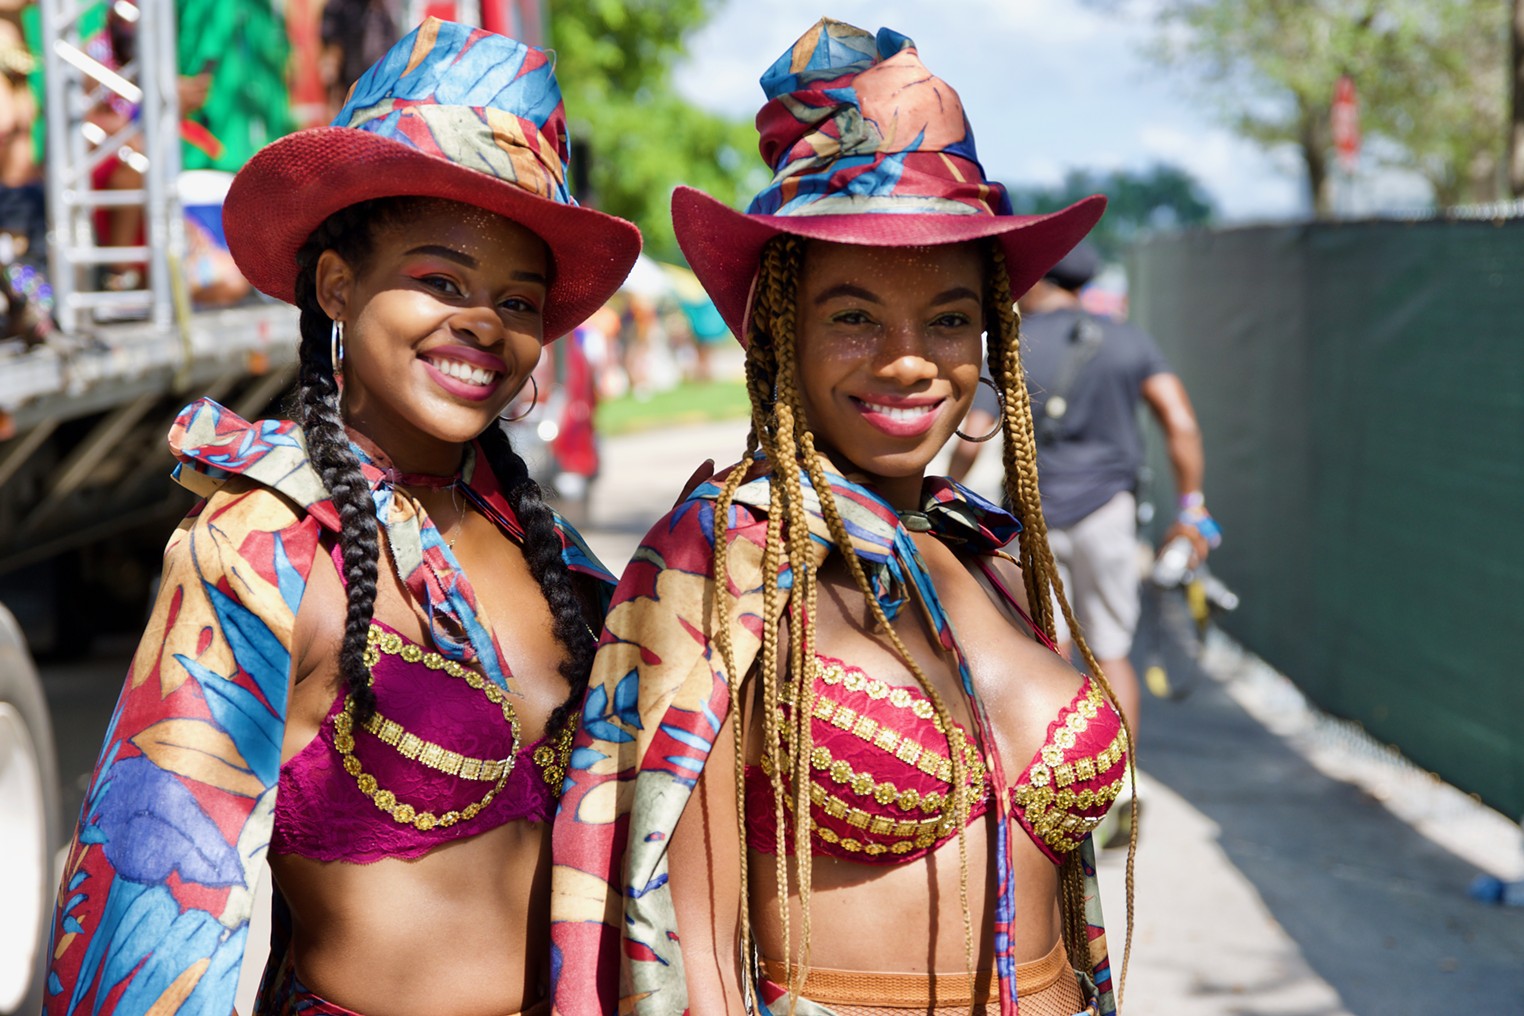 Things to Do in Miami: Miami Carnival October 7-9, 2022